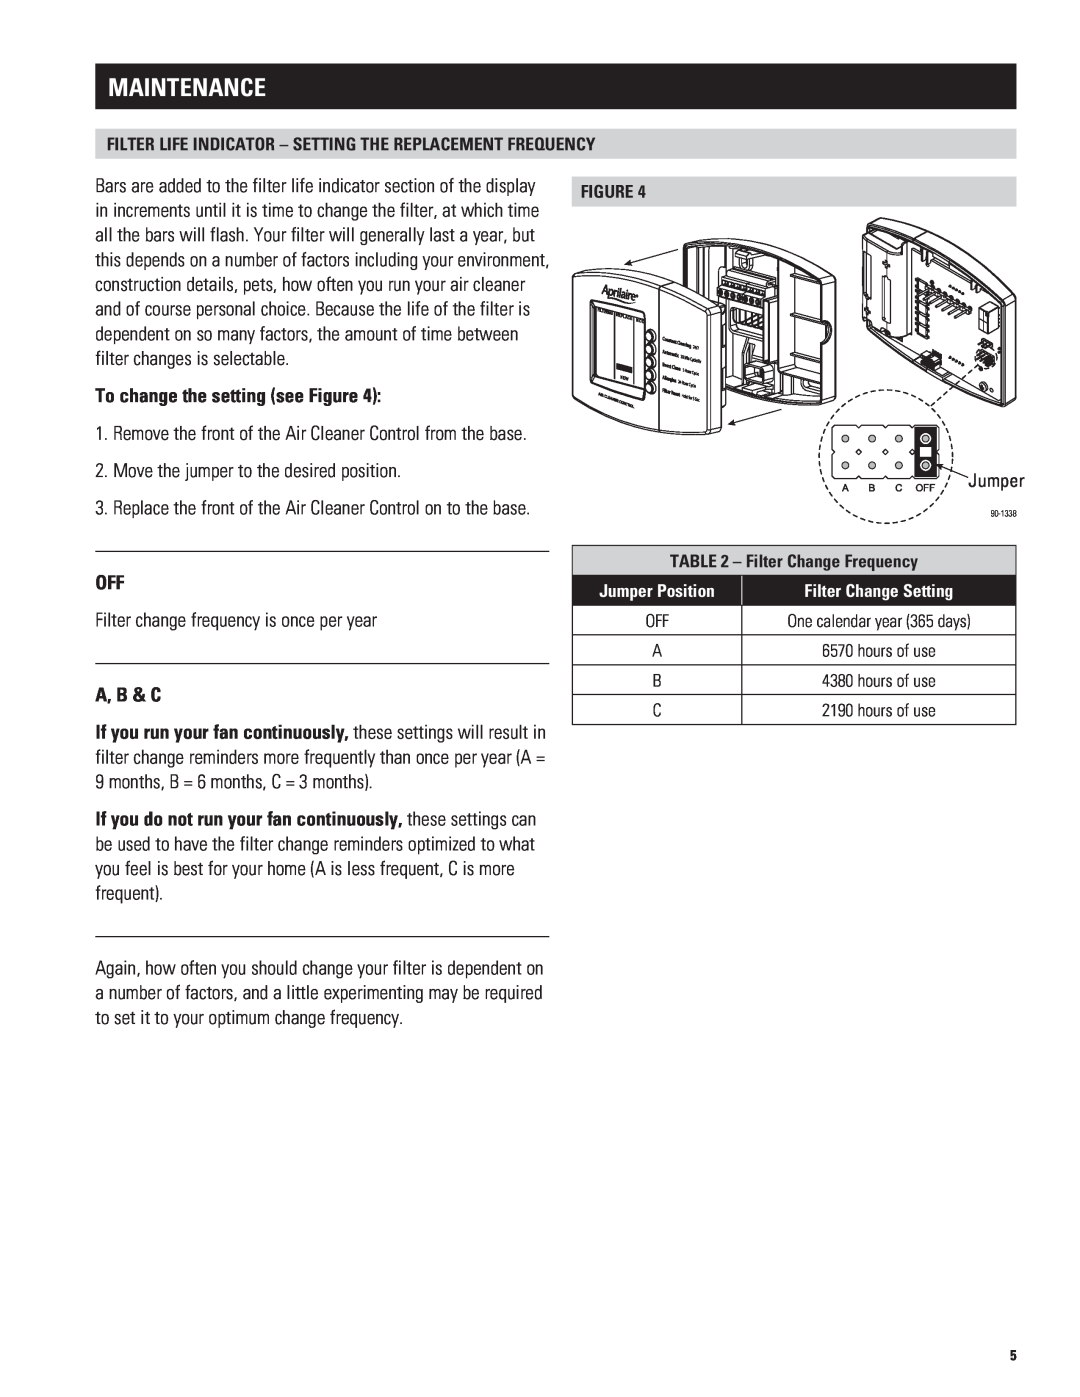 Aprilaire 4200, 4400 owner manual Maintenance, To change the setting see Figure, A, B & C, Jumper, Filter Change Frequency 